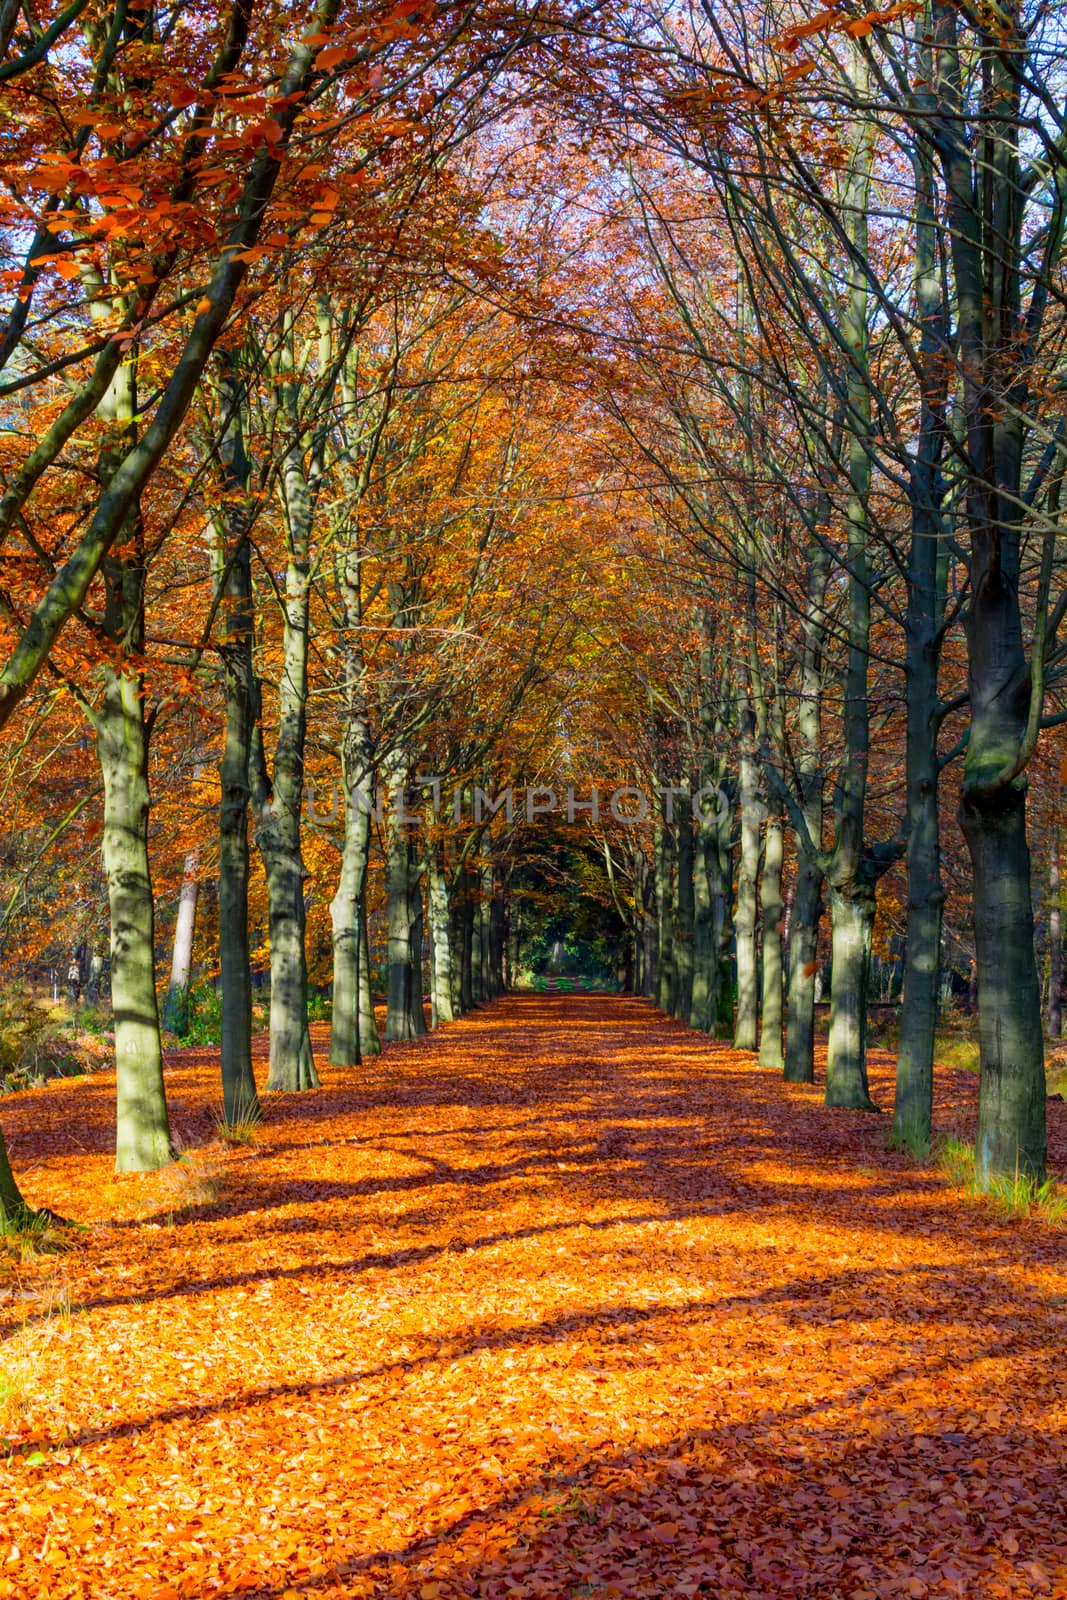 Autumn avenue, leaves on the ground, with trees lined up on a sunny day. Beauty in nature and seasons.